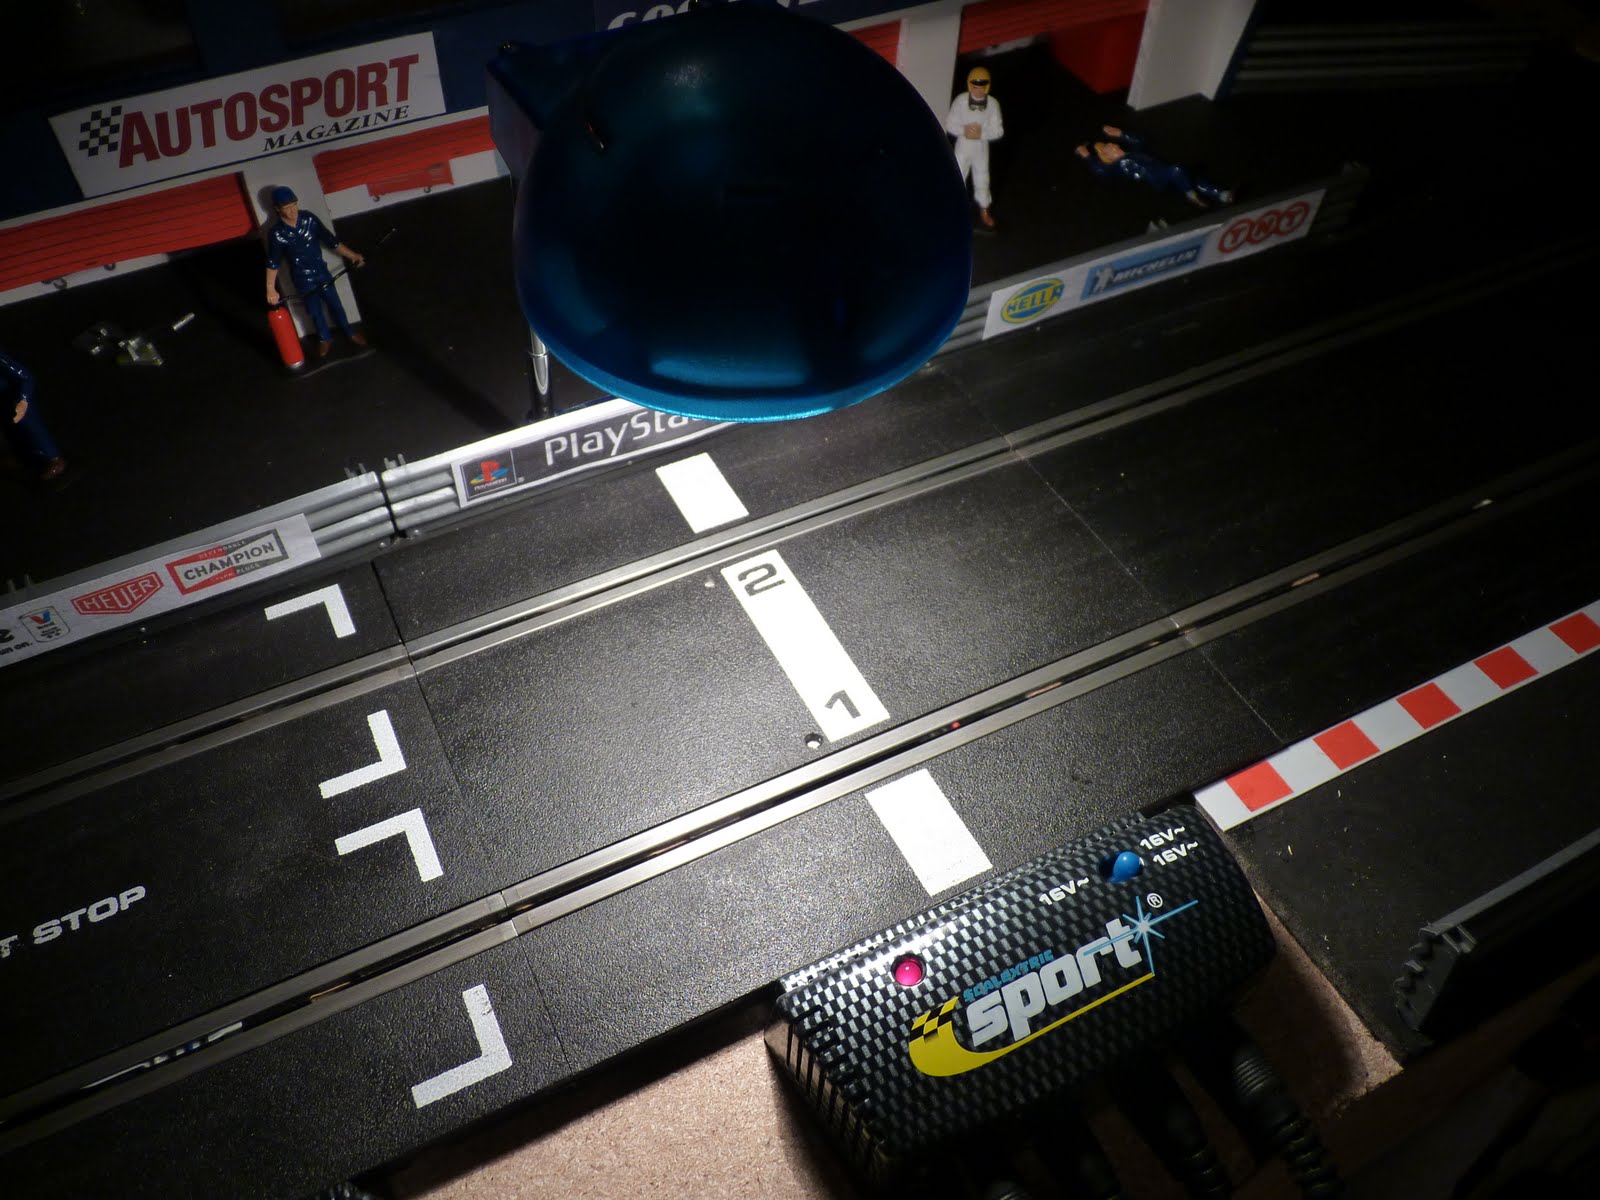 My Scalextric: Detection and prevention